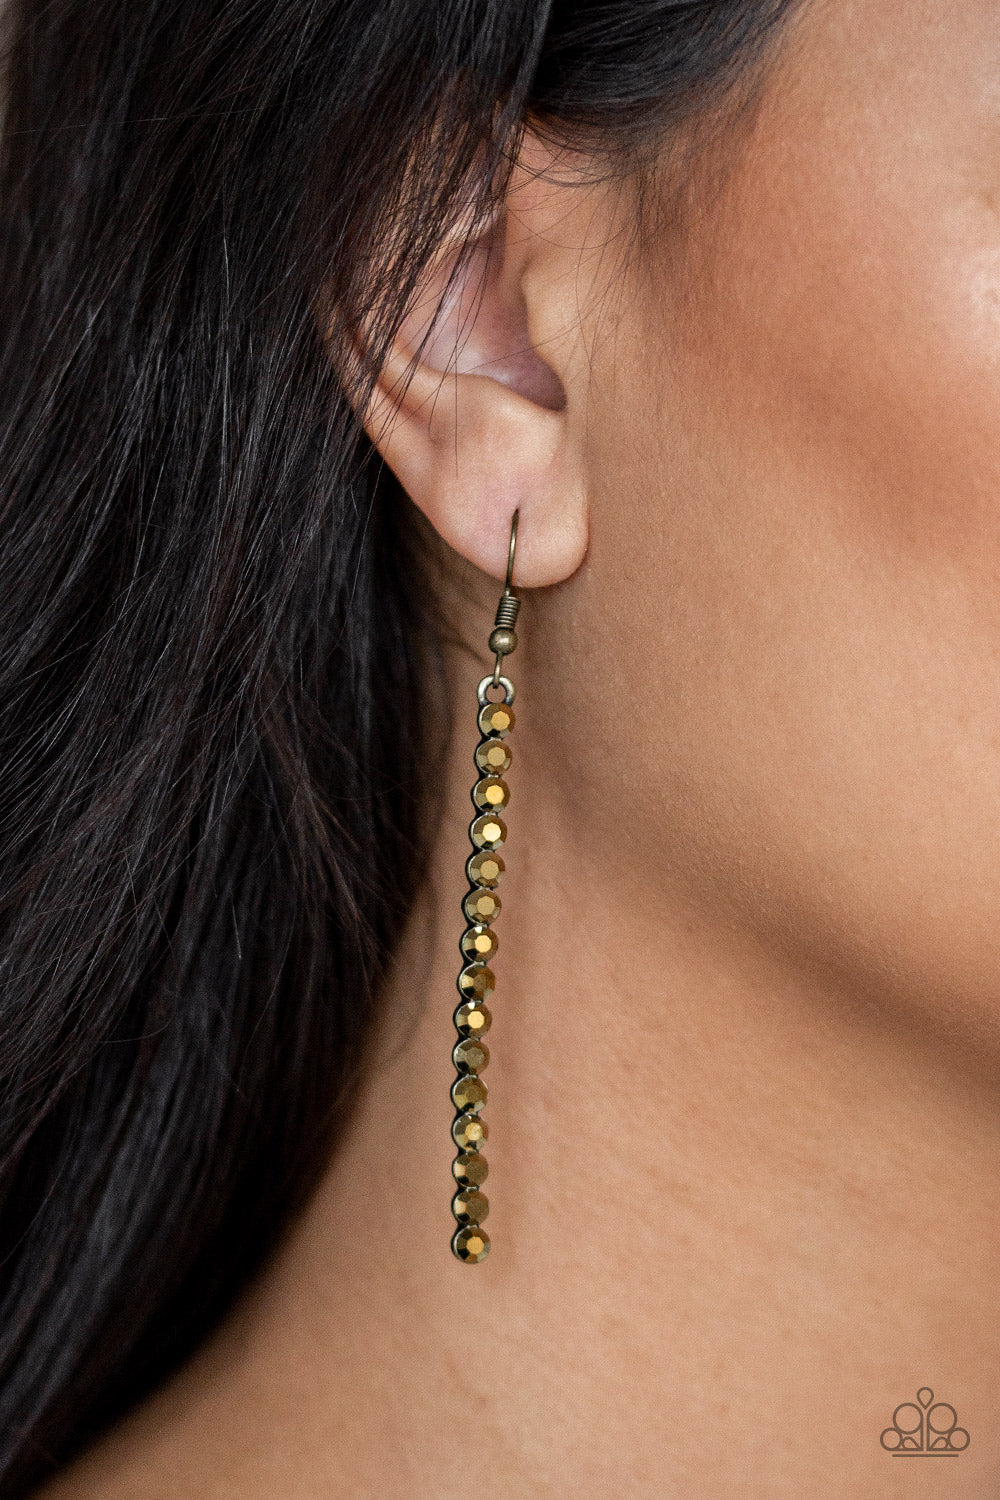 Paparazzi earring - Grunge Meets Glamour - Brass